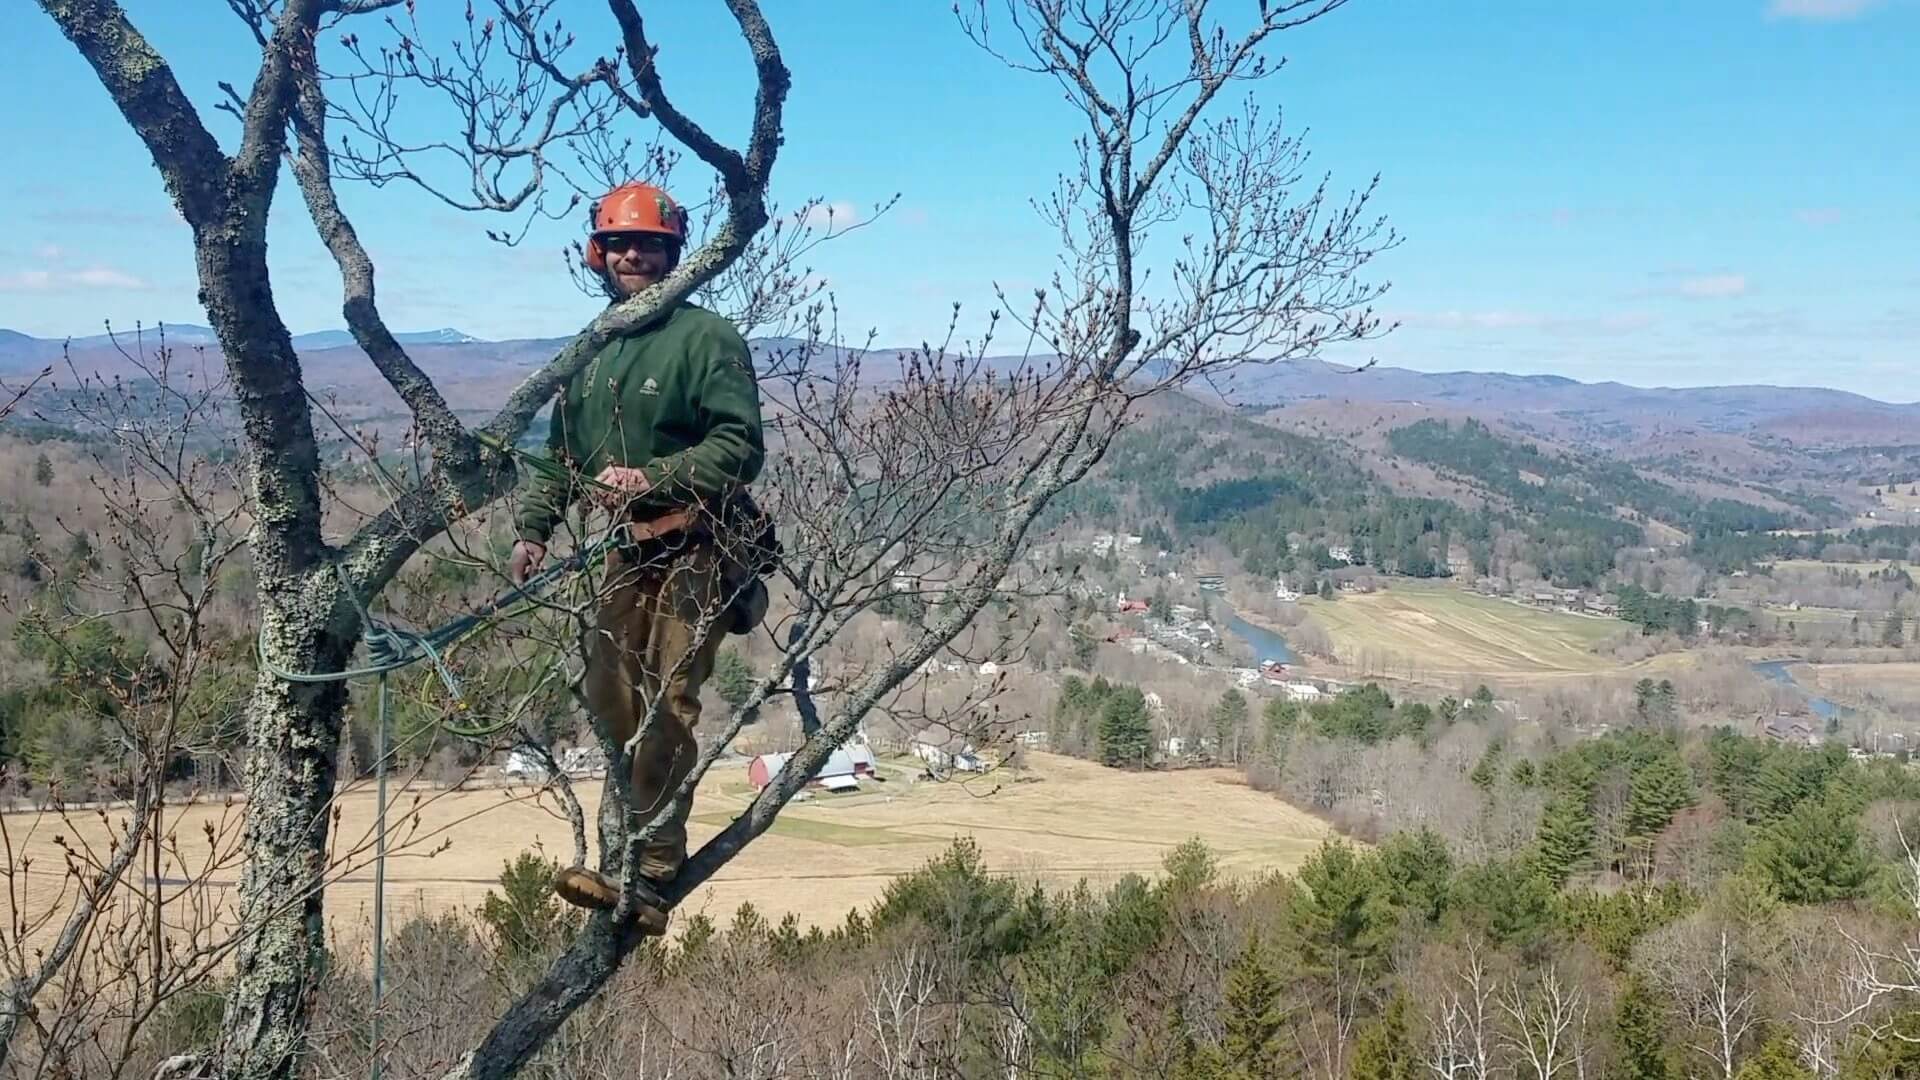 Chippers Arborist high in tree